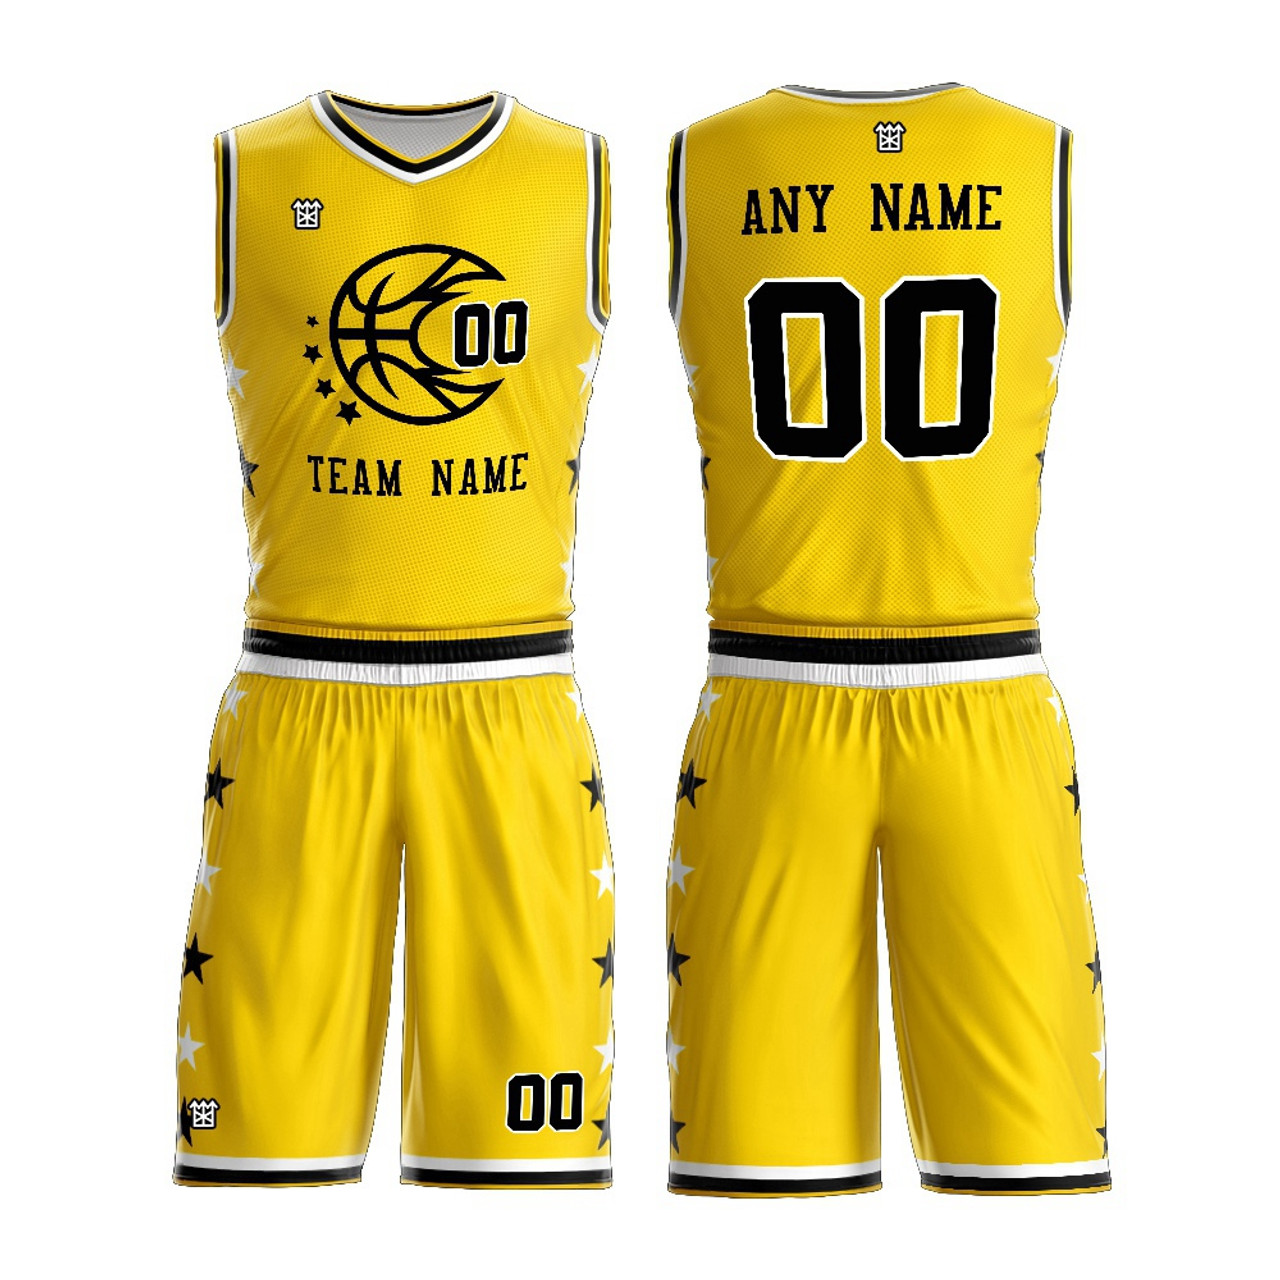 jersey color yellow